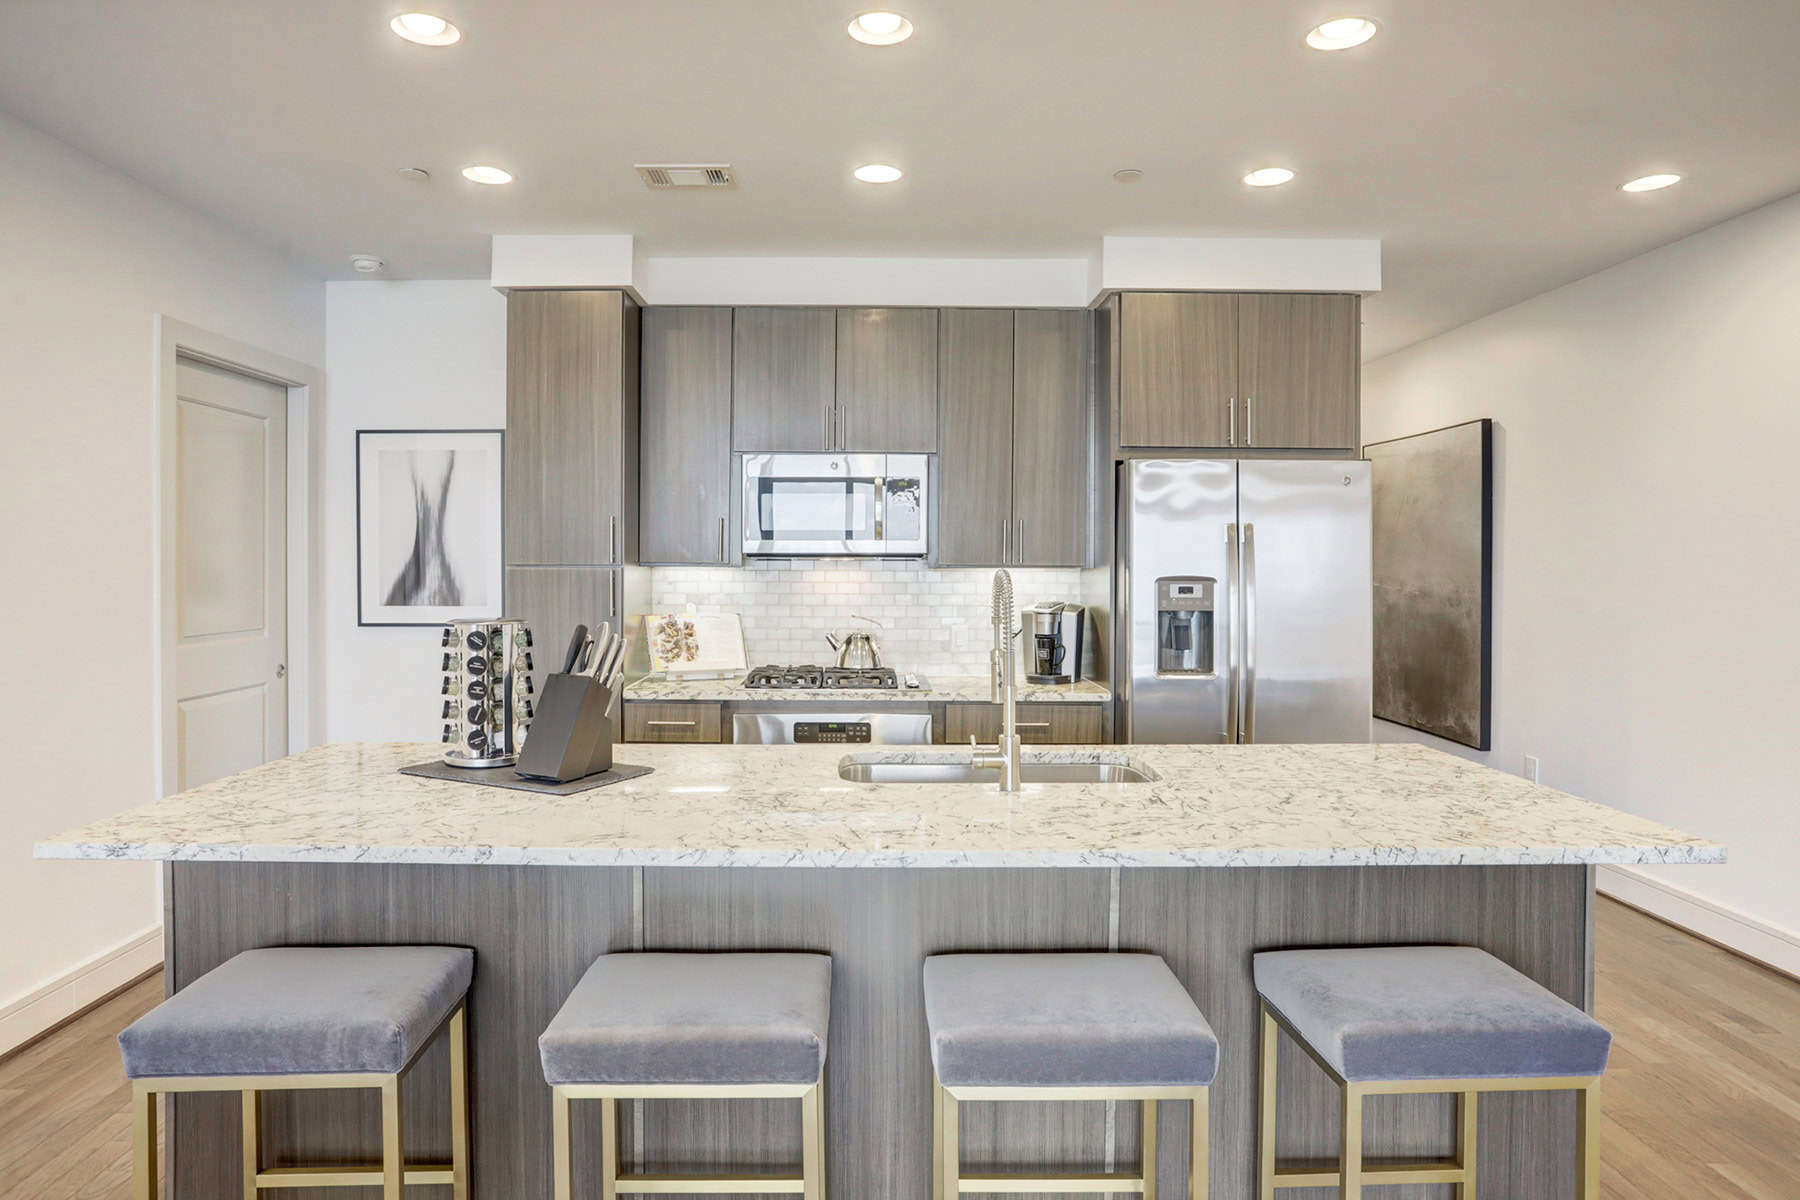 Market Square Tower Residence F Kitchen